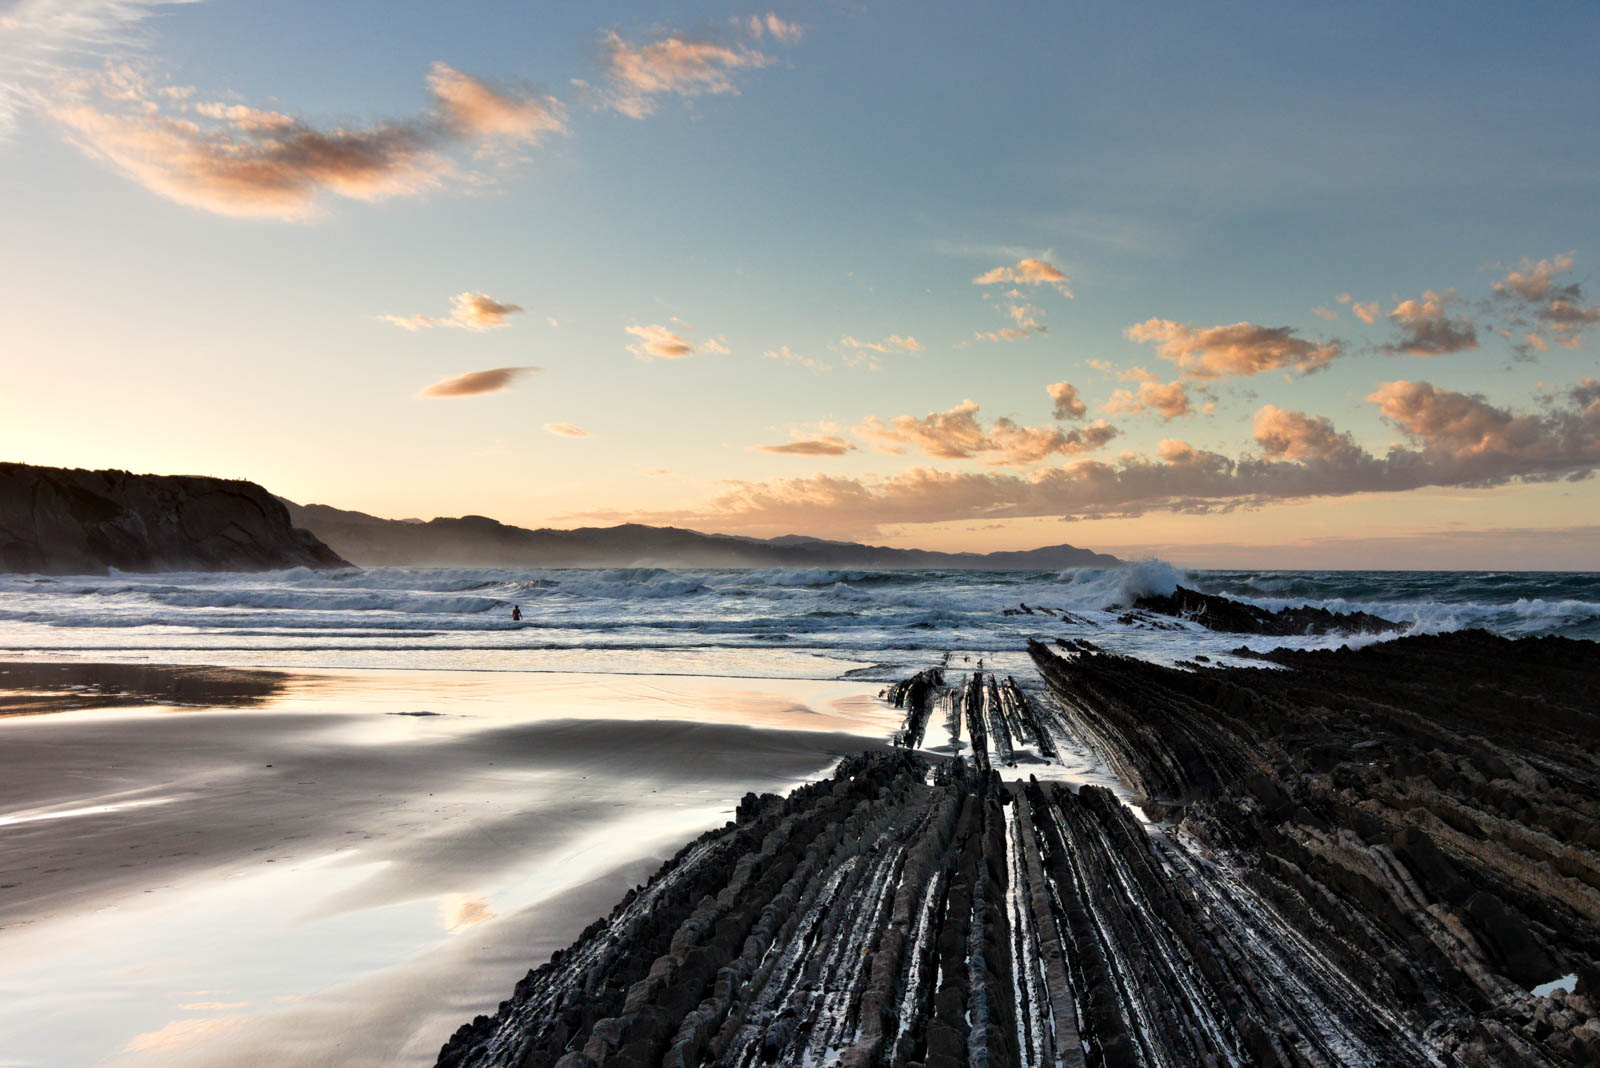 Zumaia sunset - Canon 80D with Tokina atx-i 11-20mm F2.8 CF @ 11mm, f/5, ISO100, 1/160s